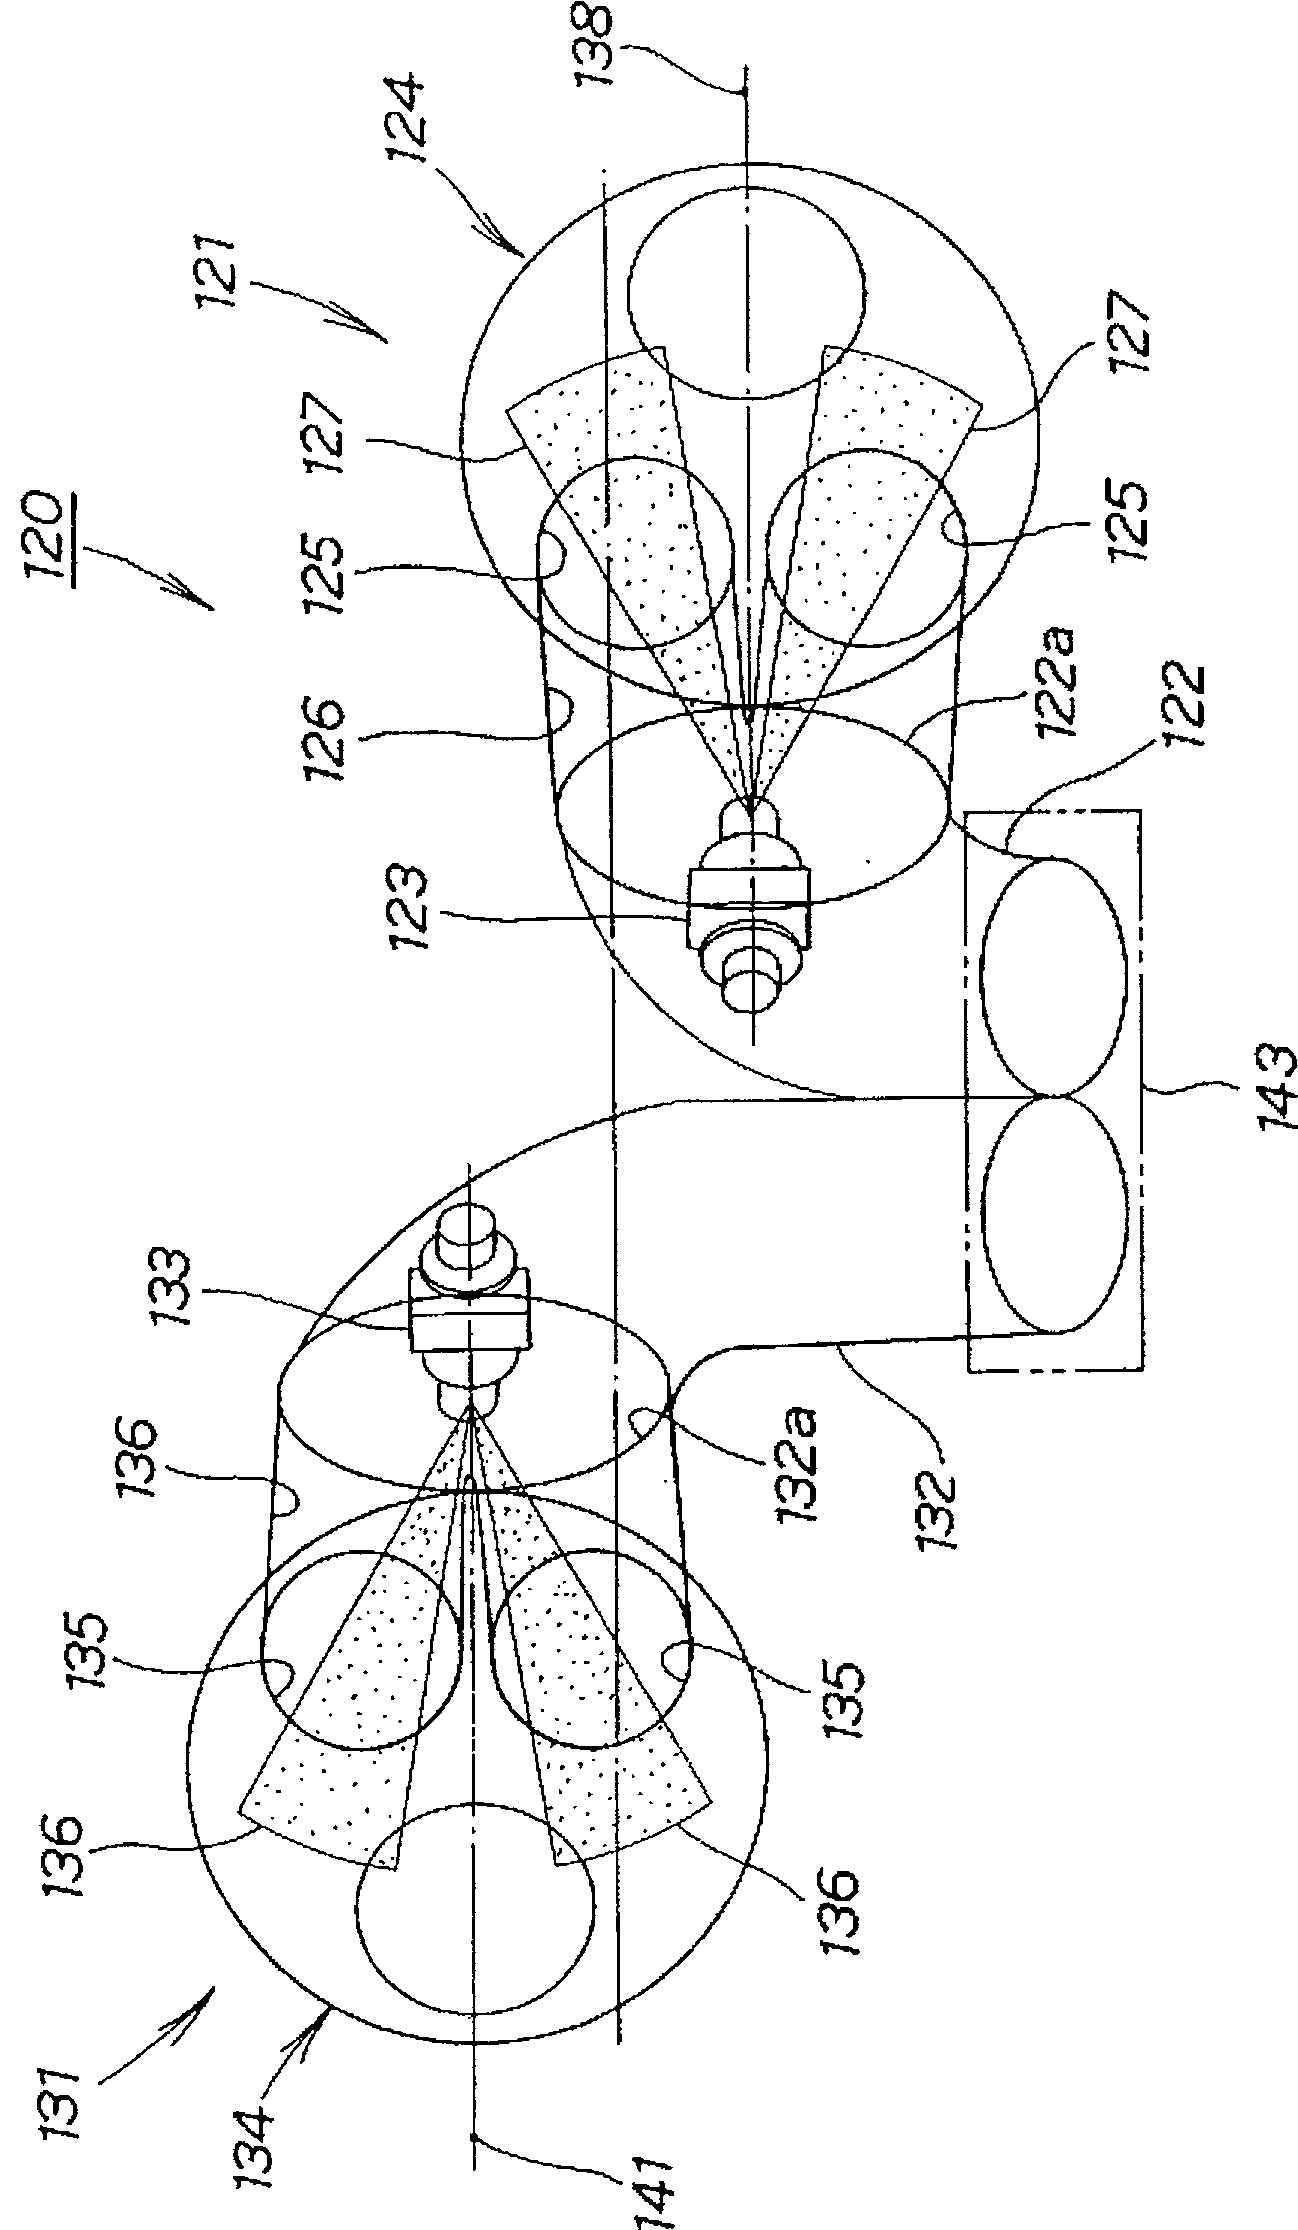 Fuel jetting valve dispatching structure of V-type two-cylinder engine